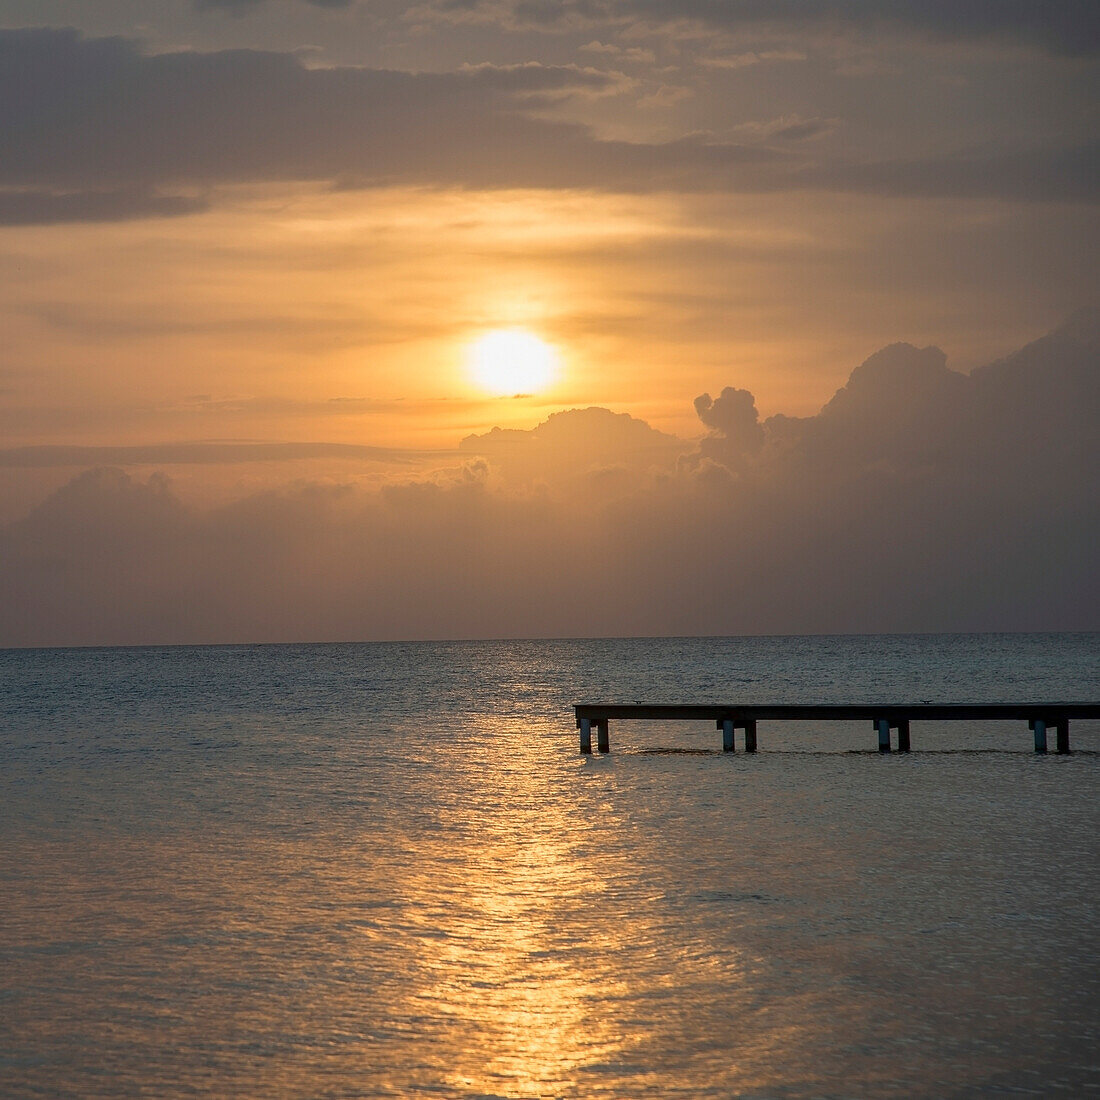 'Silhouette Of A Dock Leading Out To Water With The Sun Setting In A Dramatic Sky; Utila, Bay Islands, Honduras'